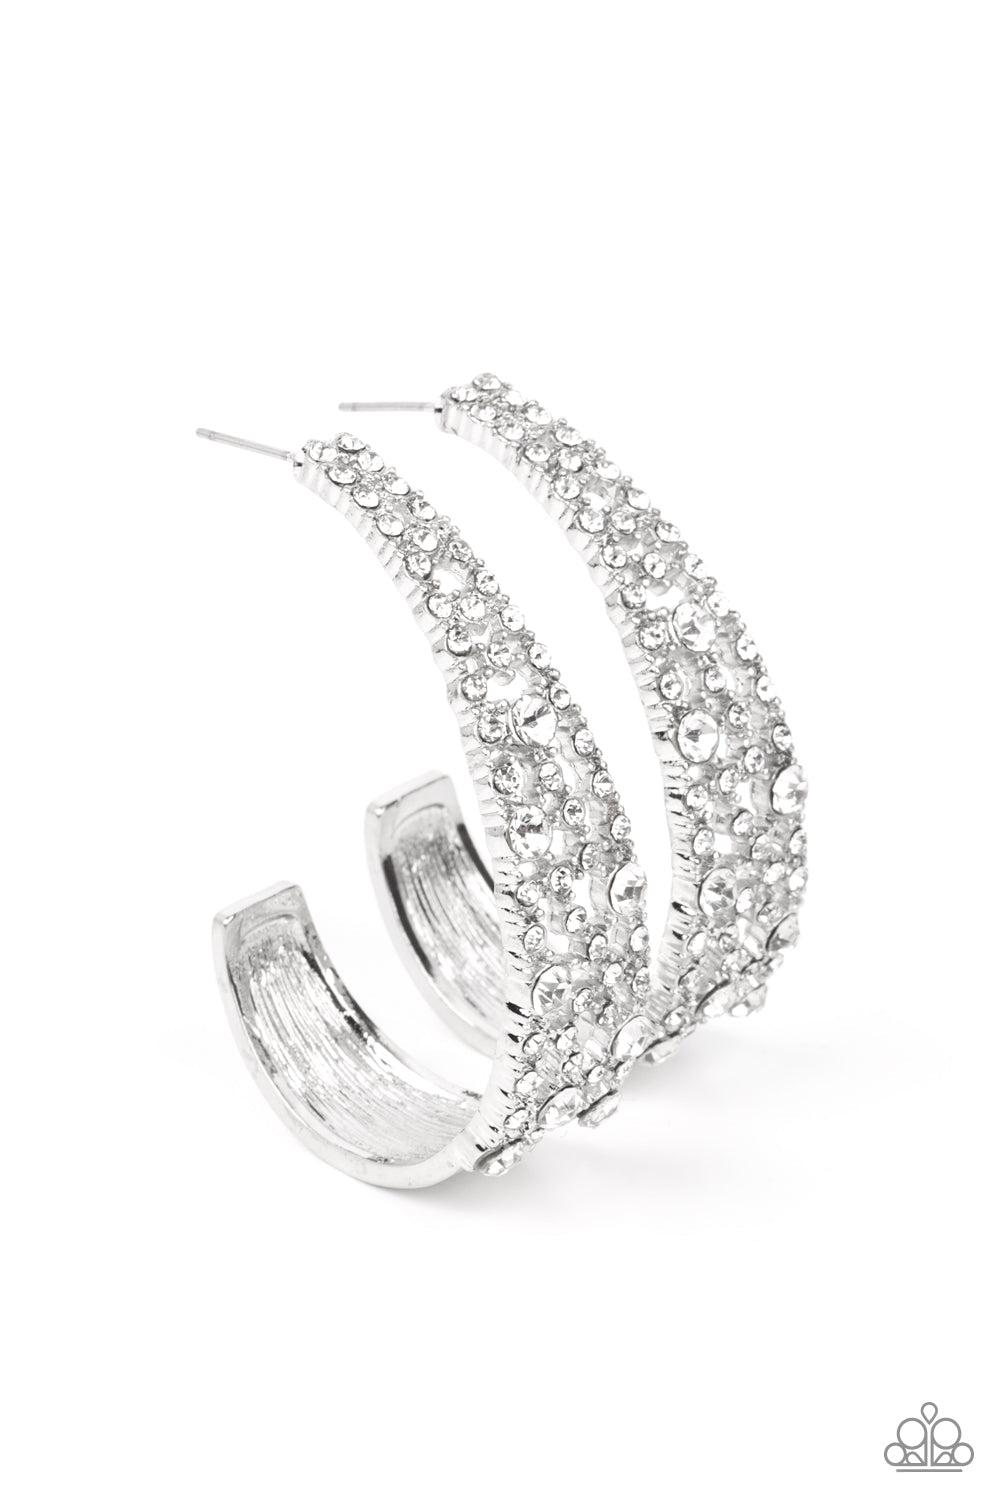 Cold As Ice White Rhinestone Hoop Earrings - Paparazzi Accessories- lightbox - CarasShop.com - $5 Jewelry by Cara Jewels